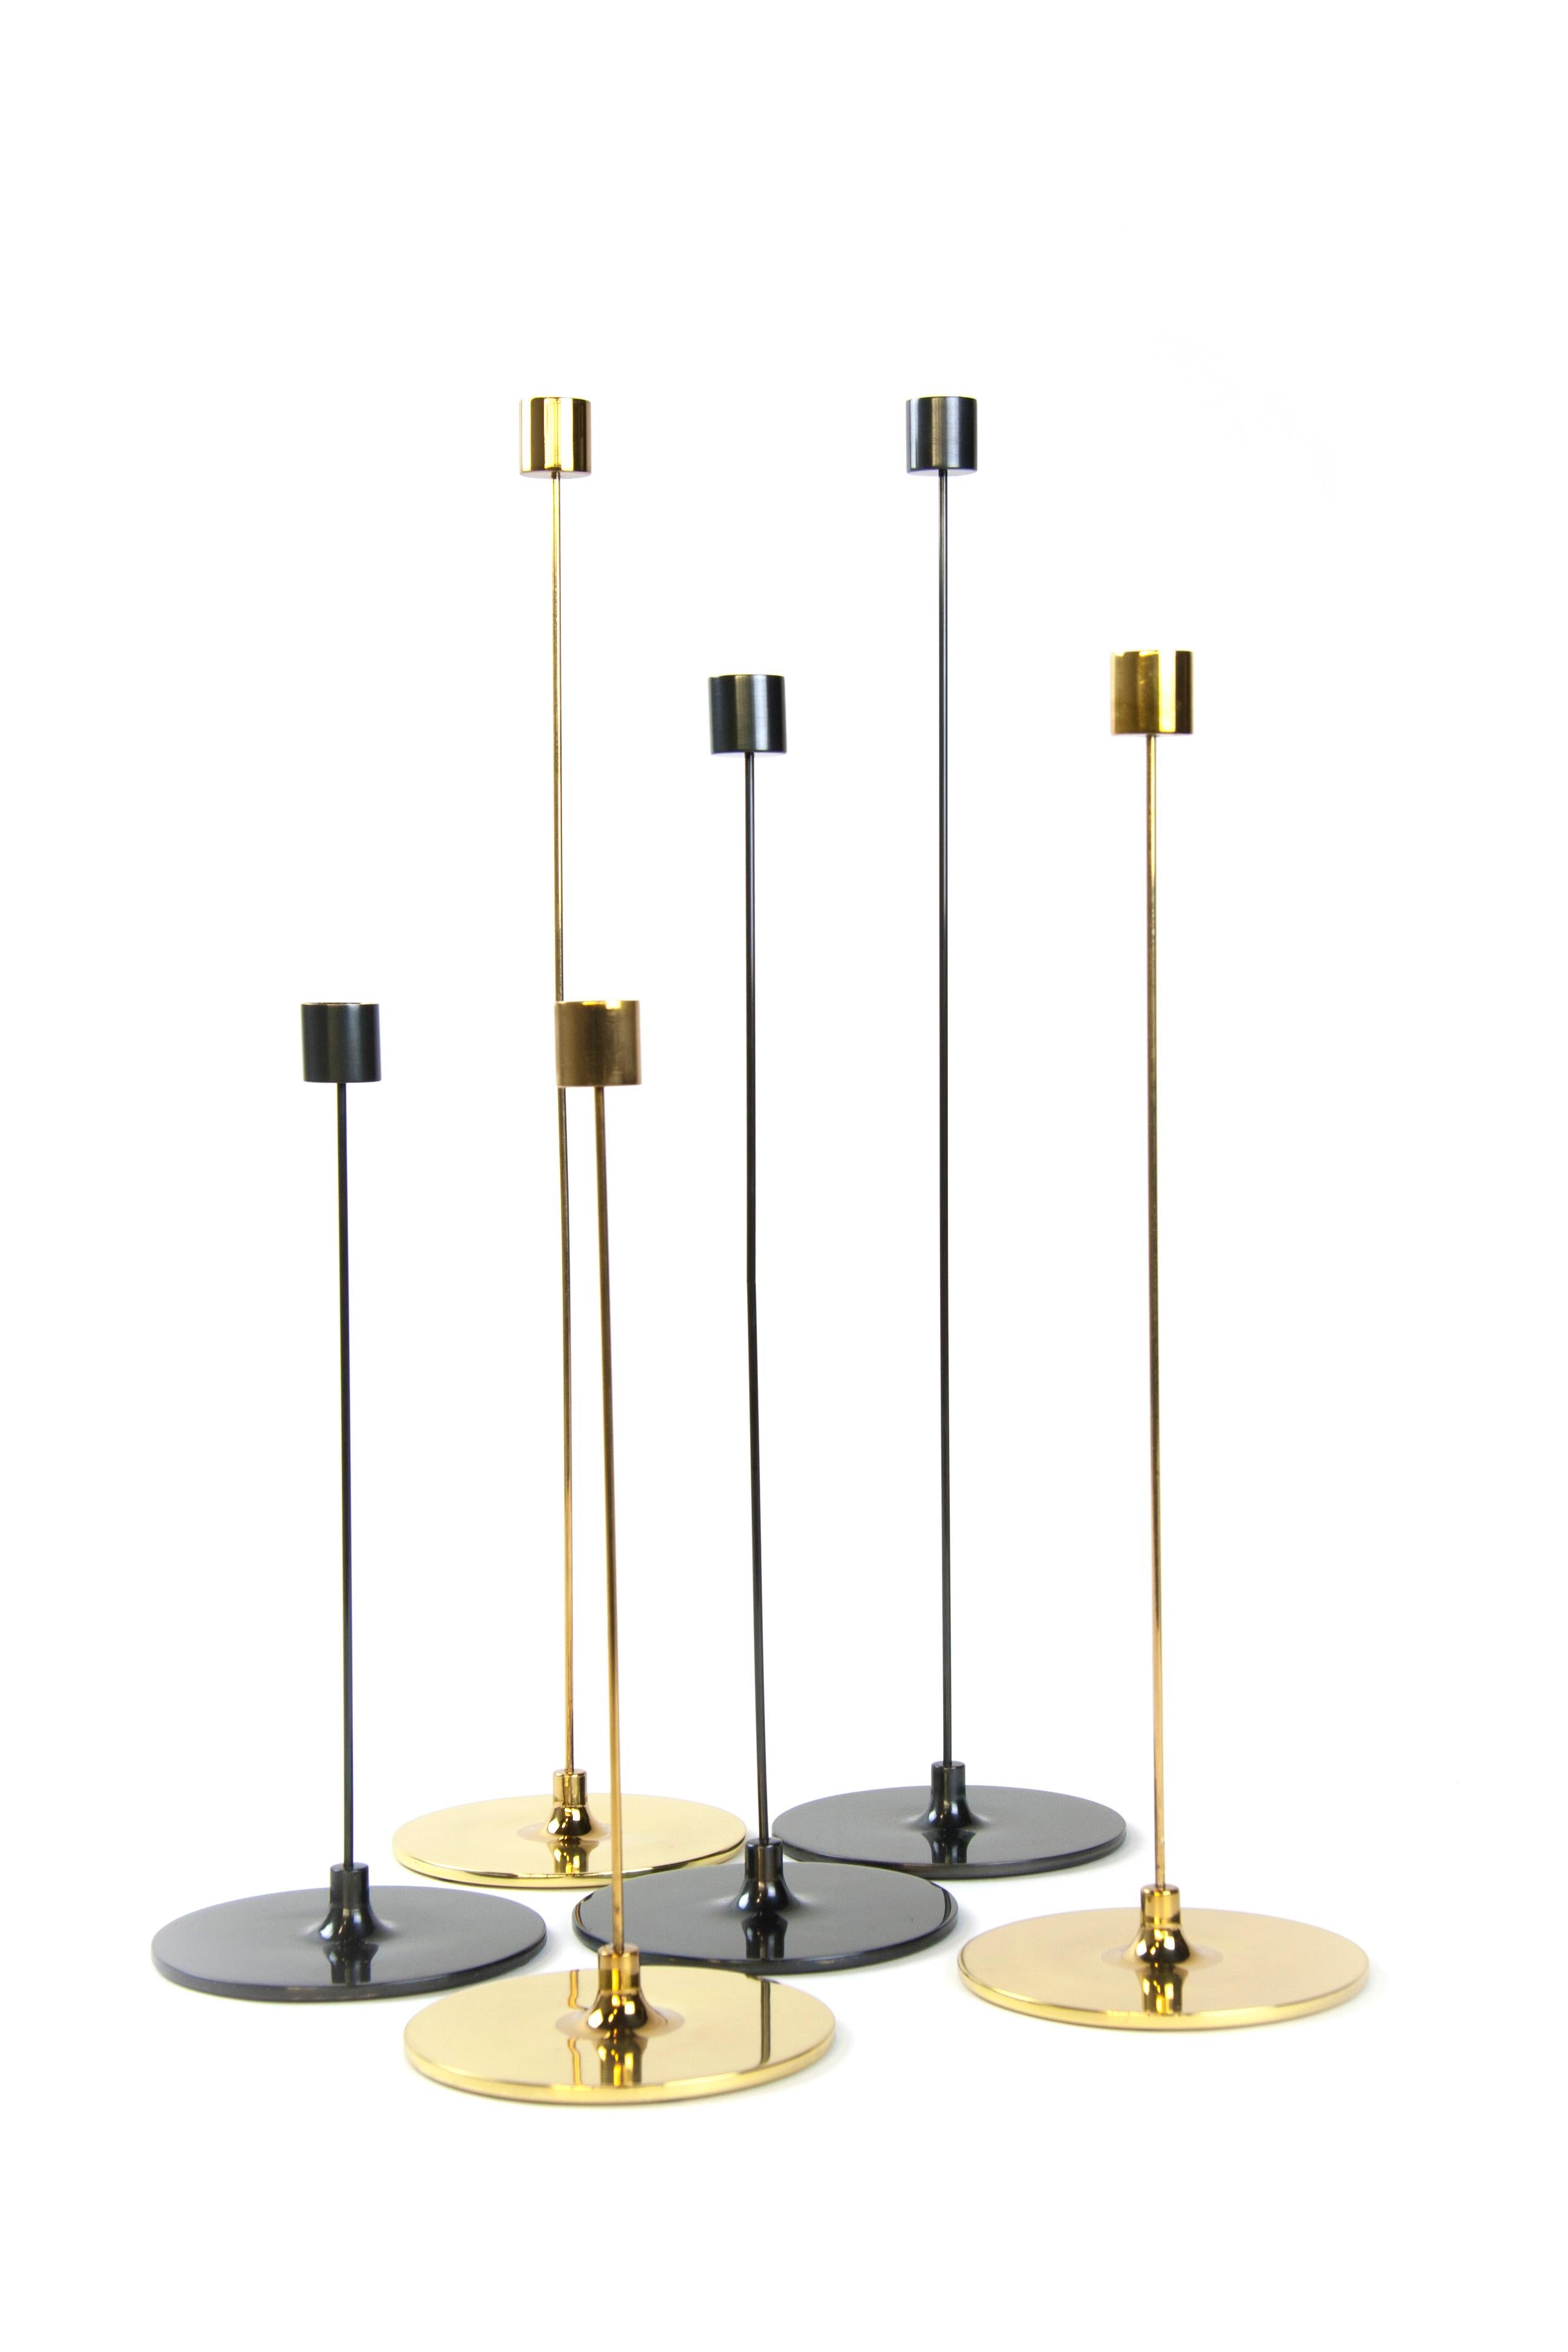 Small pin darkened brass candlestick by Gentner Design
Dimensions: D 12.7 x H 30.5 cm
Materials: darkened brass
Available in polished tarnished brass and darkened brass.
Available in small, medium and large.

With an 12”, 16”, or 20” height, the